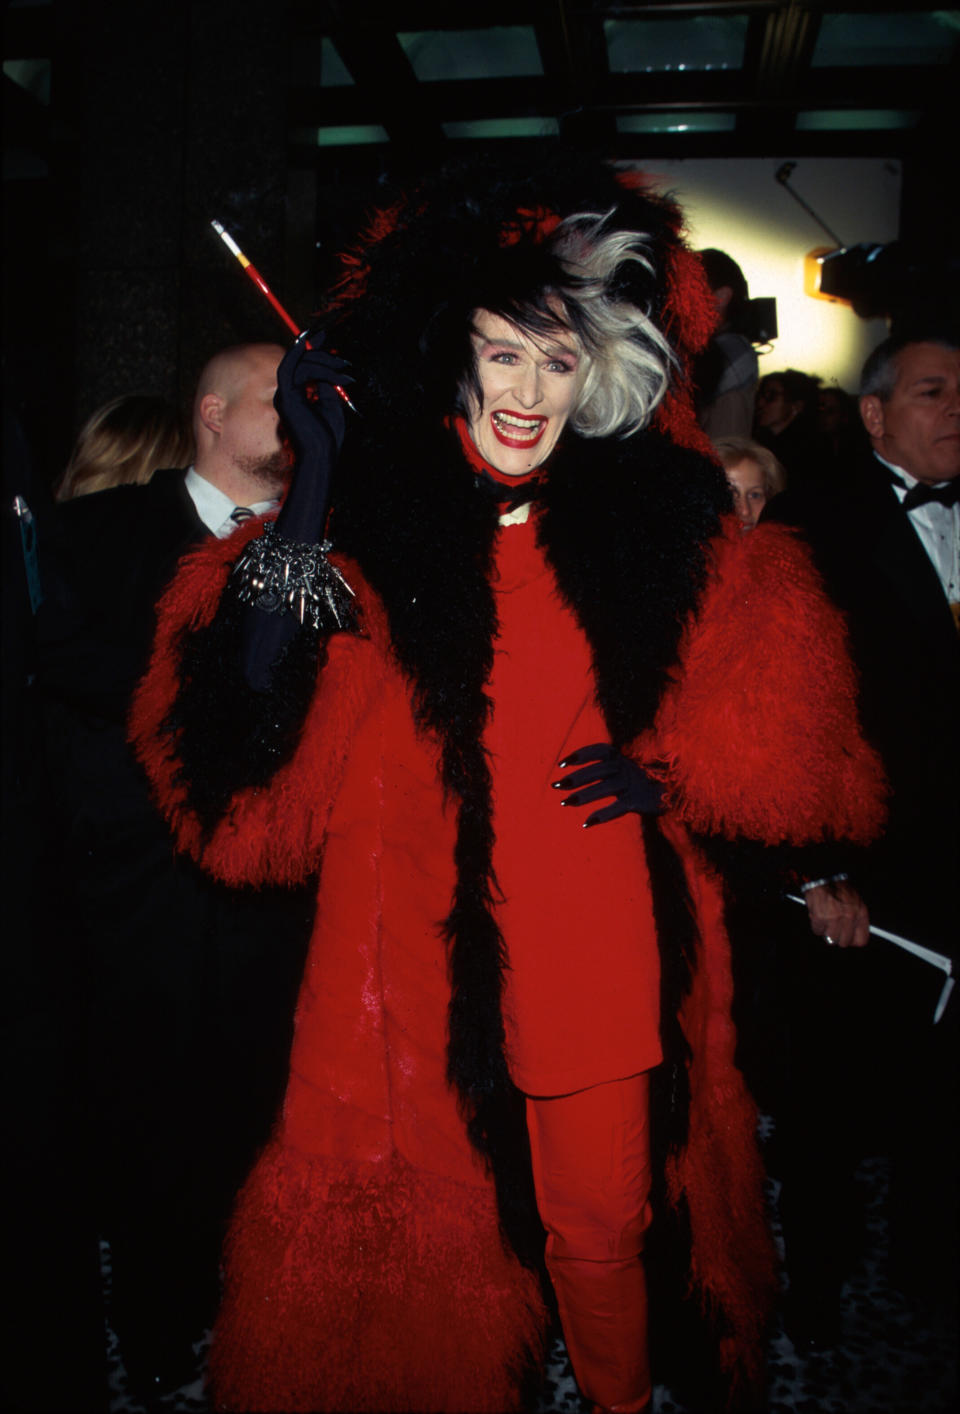 Actress Glenn Close, dressed as character Cruella DeVille, at premiere of her film 101 Dalmatians.  (Photo by Dave Allocca/DMI/The LIFE Picture Collection via Getty Images)